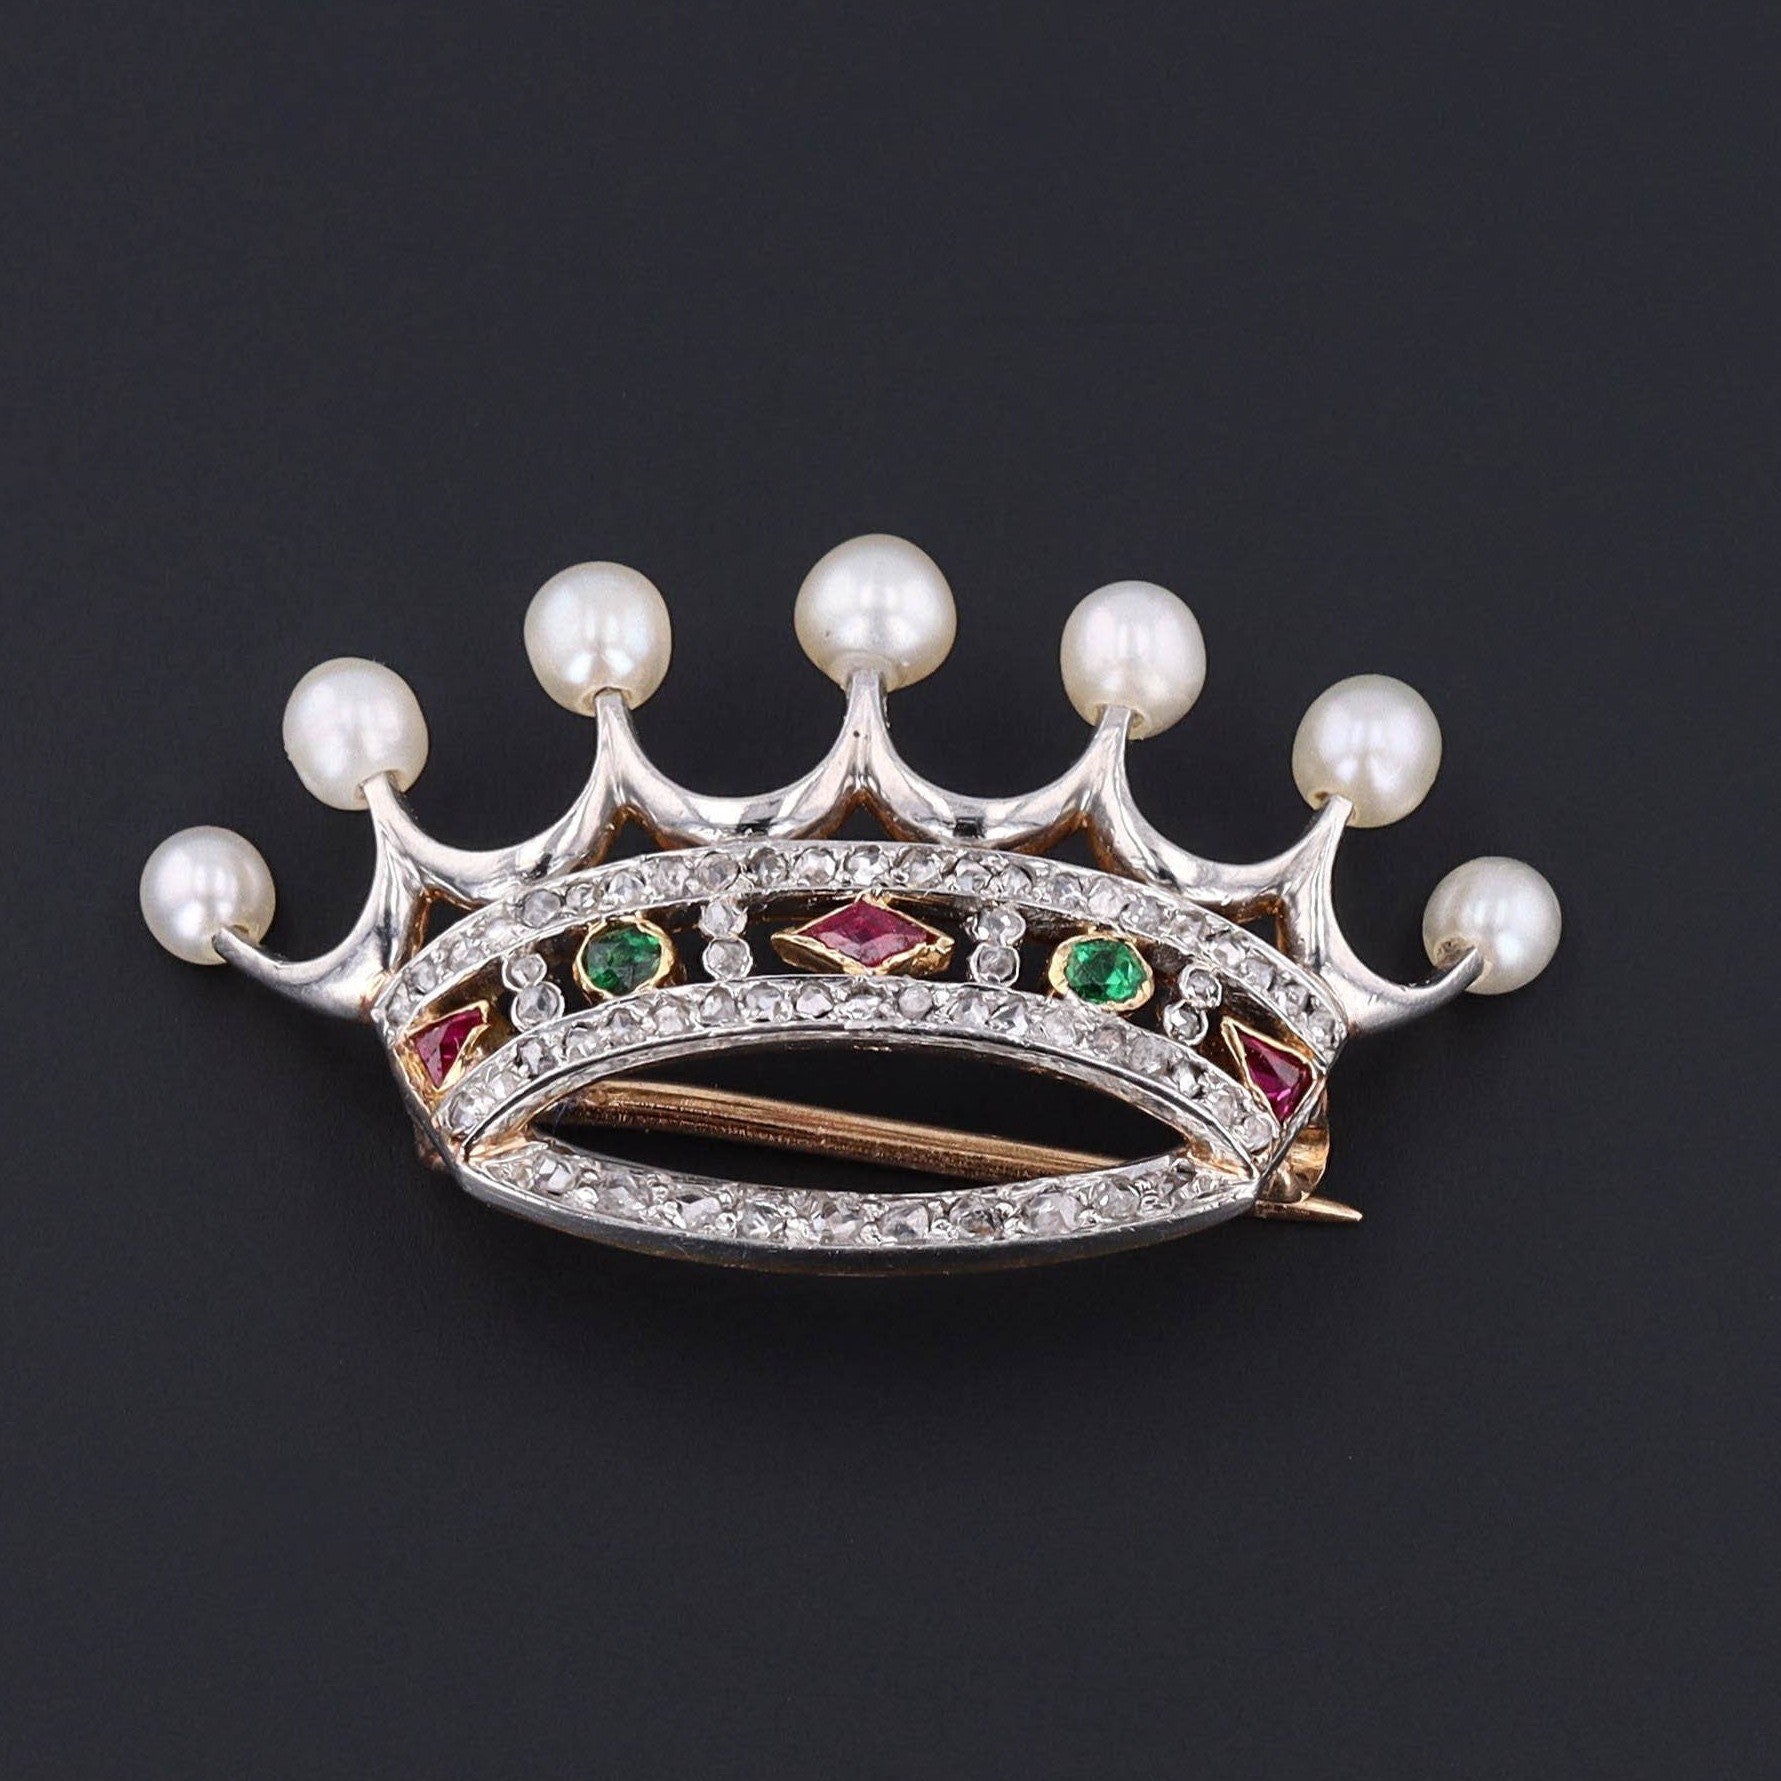 Antique Diamond and Pearl Crown Brooch